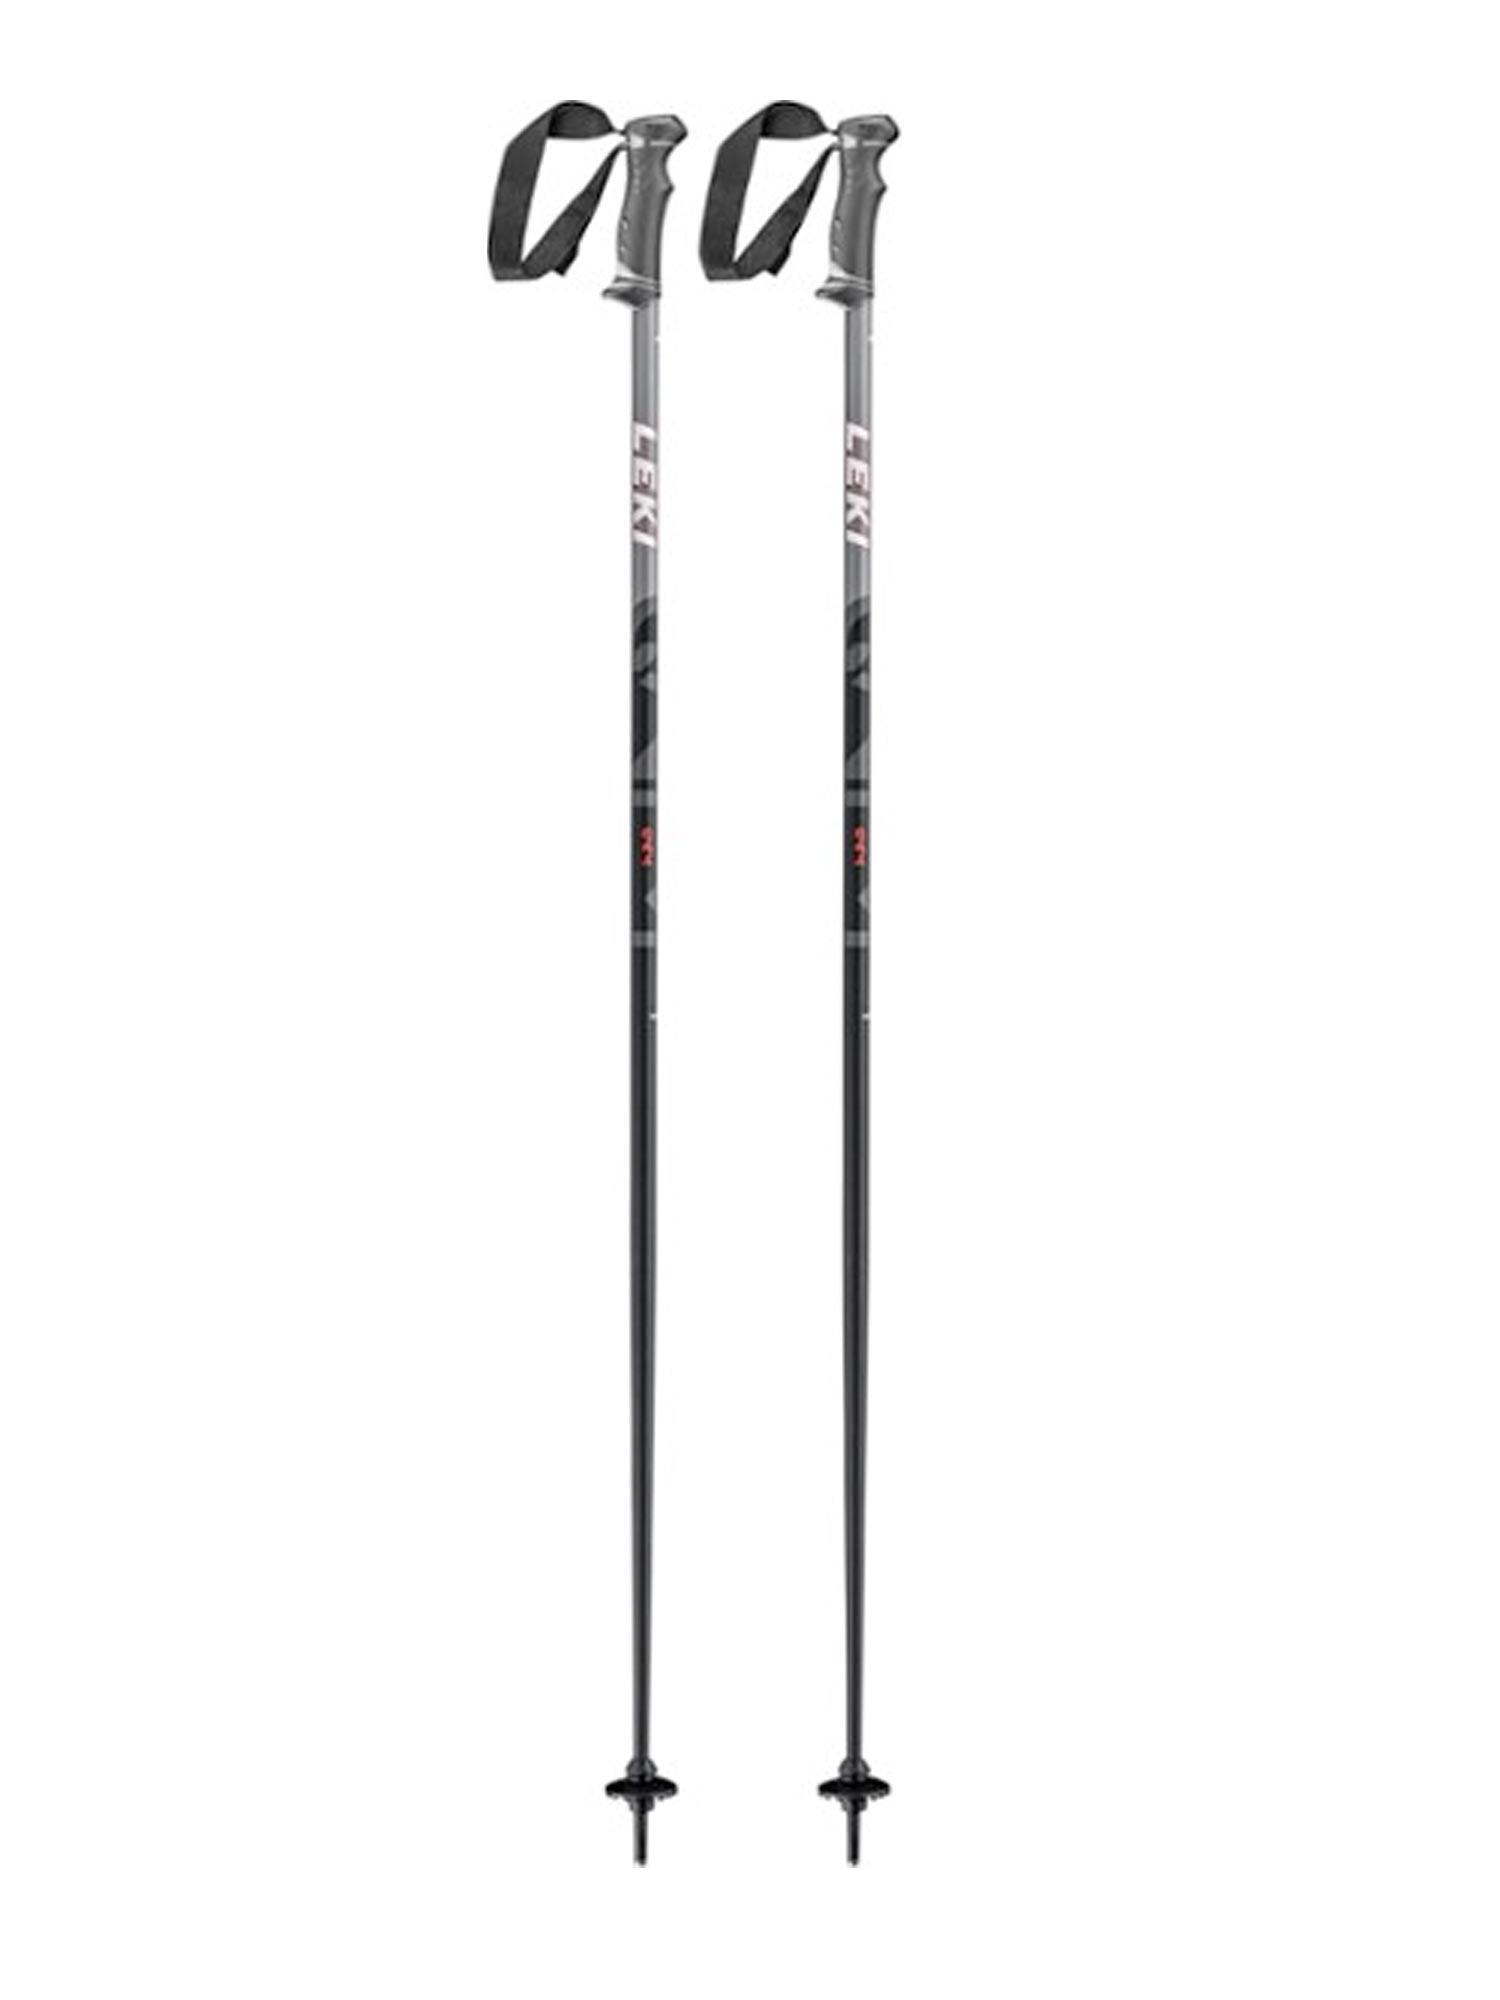 Leki ski poles, black and grey with red accent